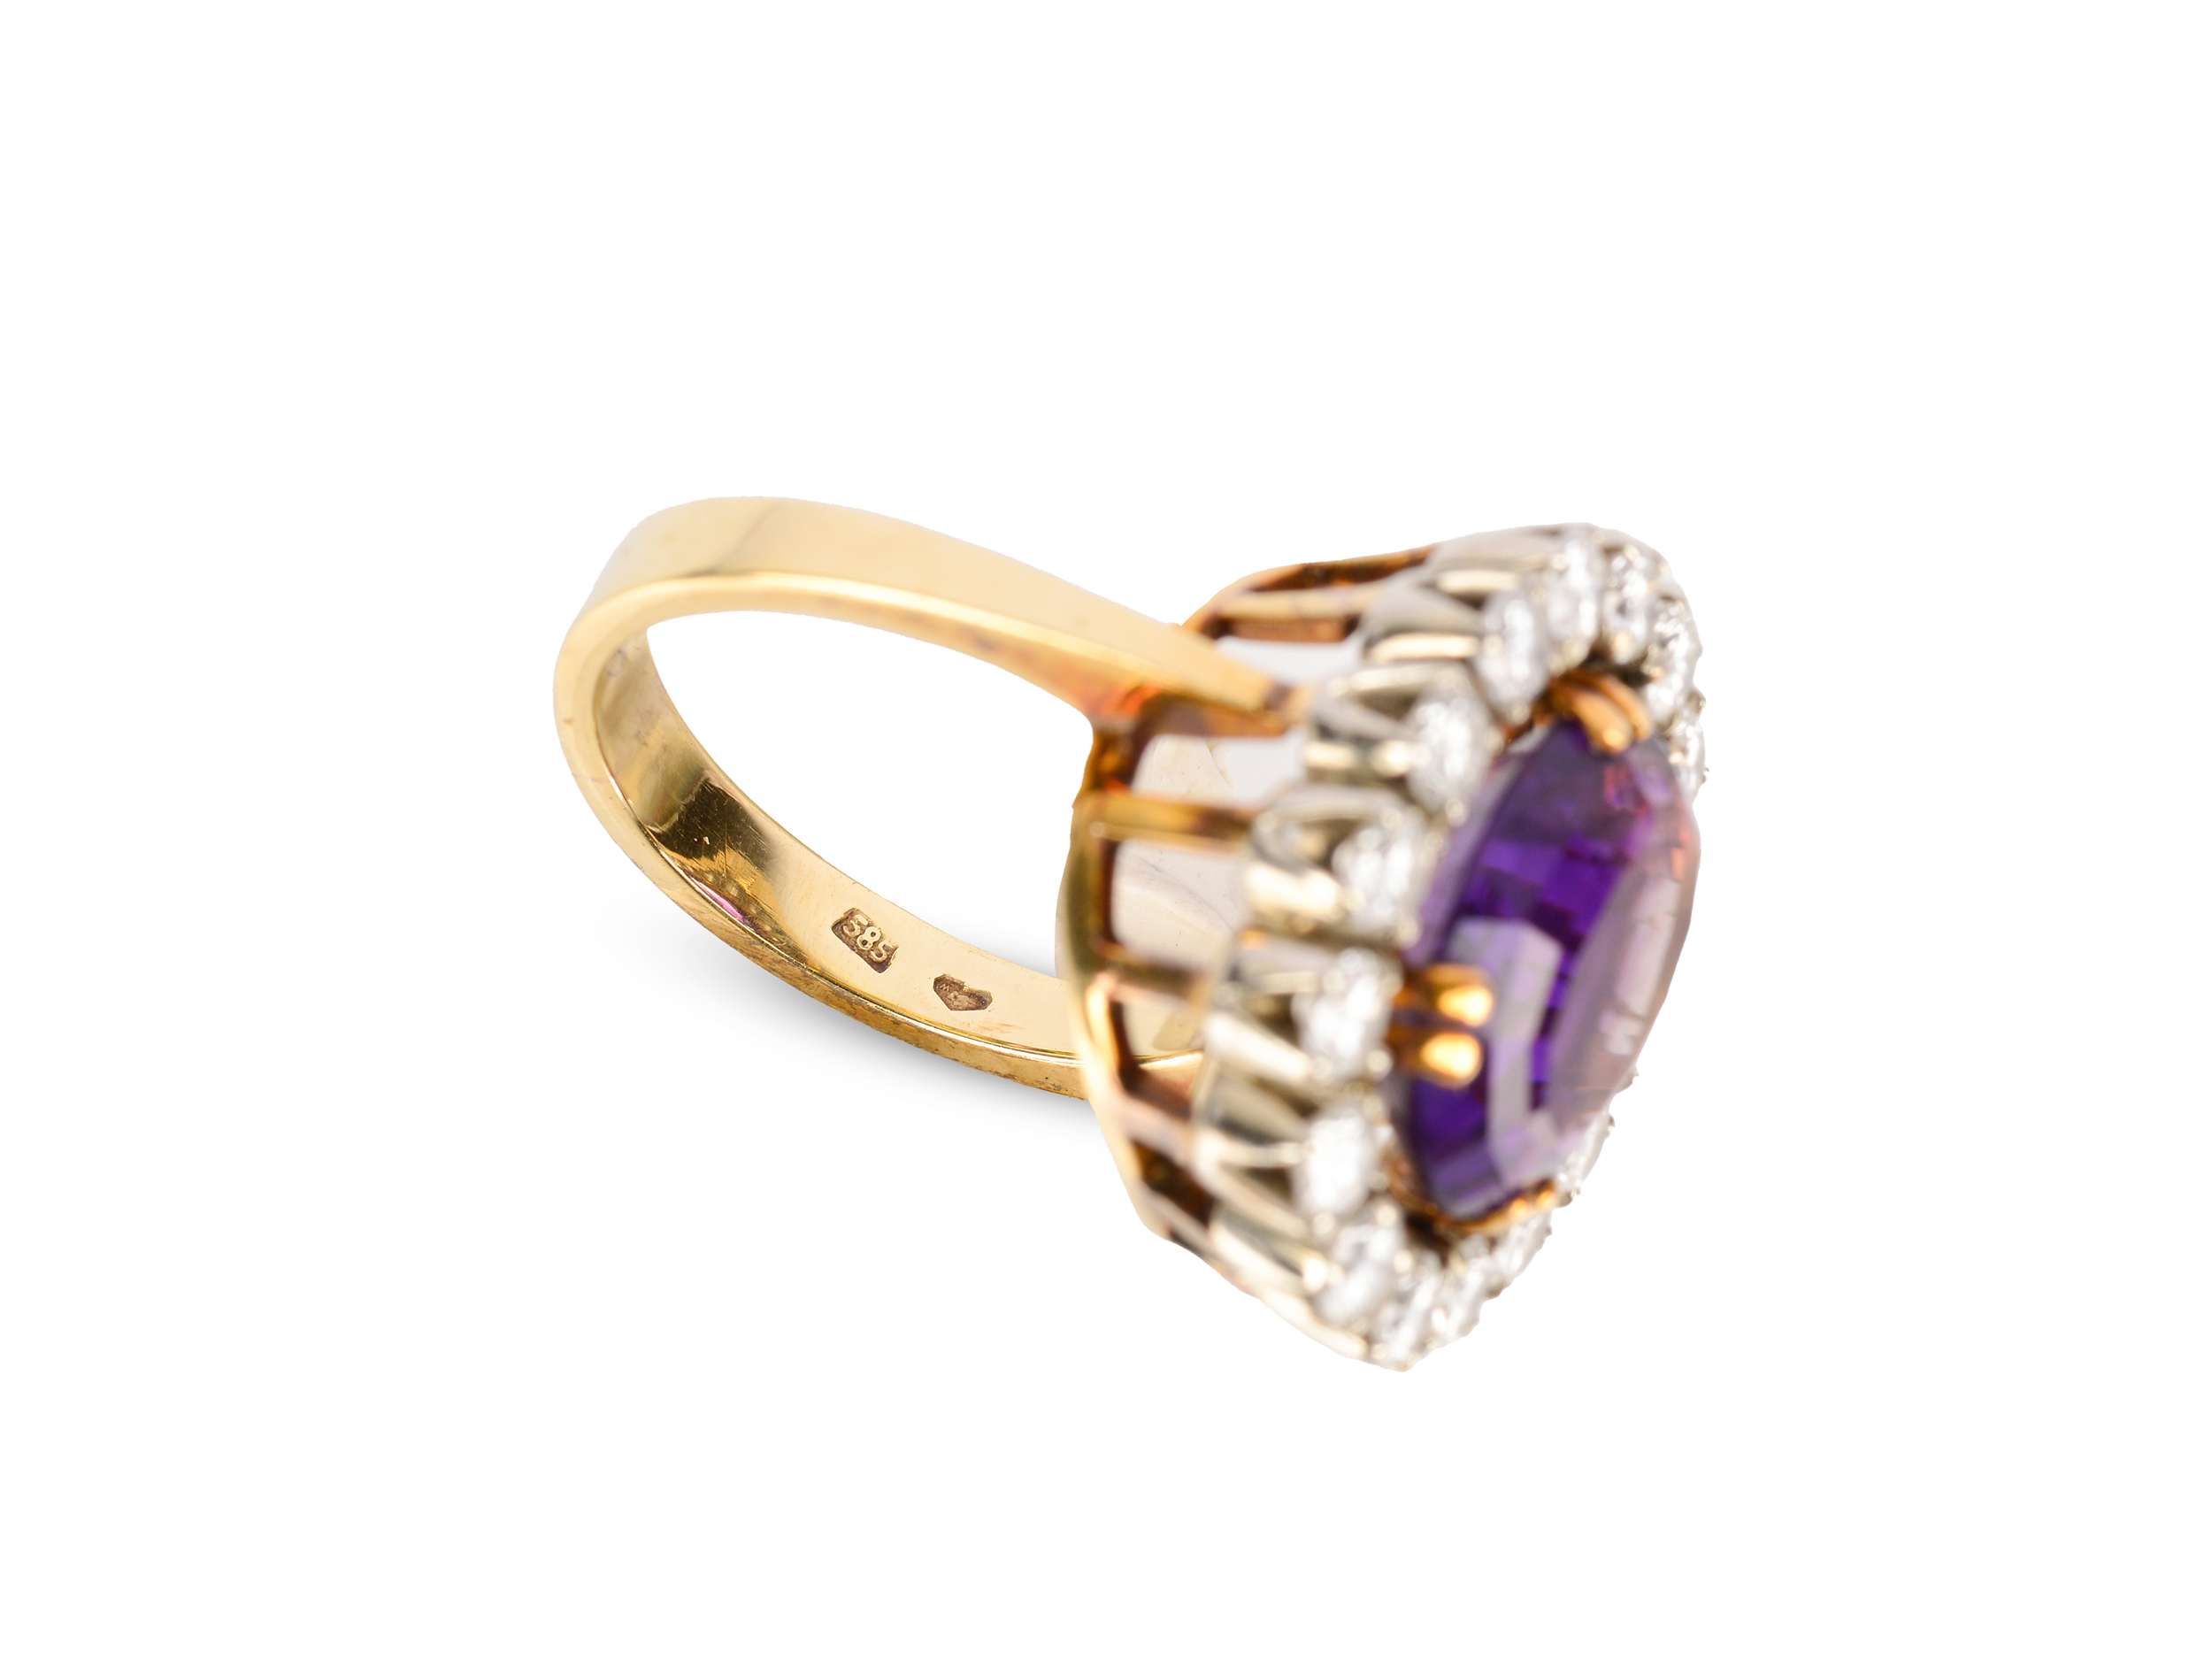 Ring with amethyst, 14kt gold, Brilliants - Image 3 of 3